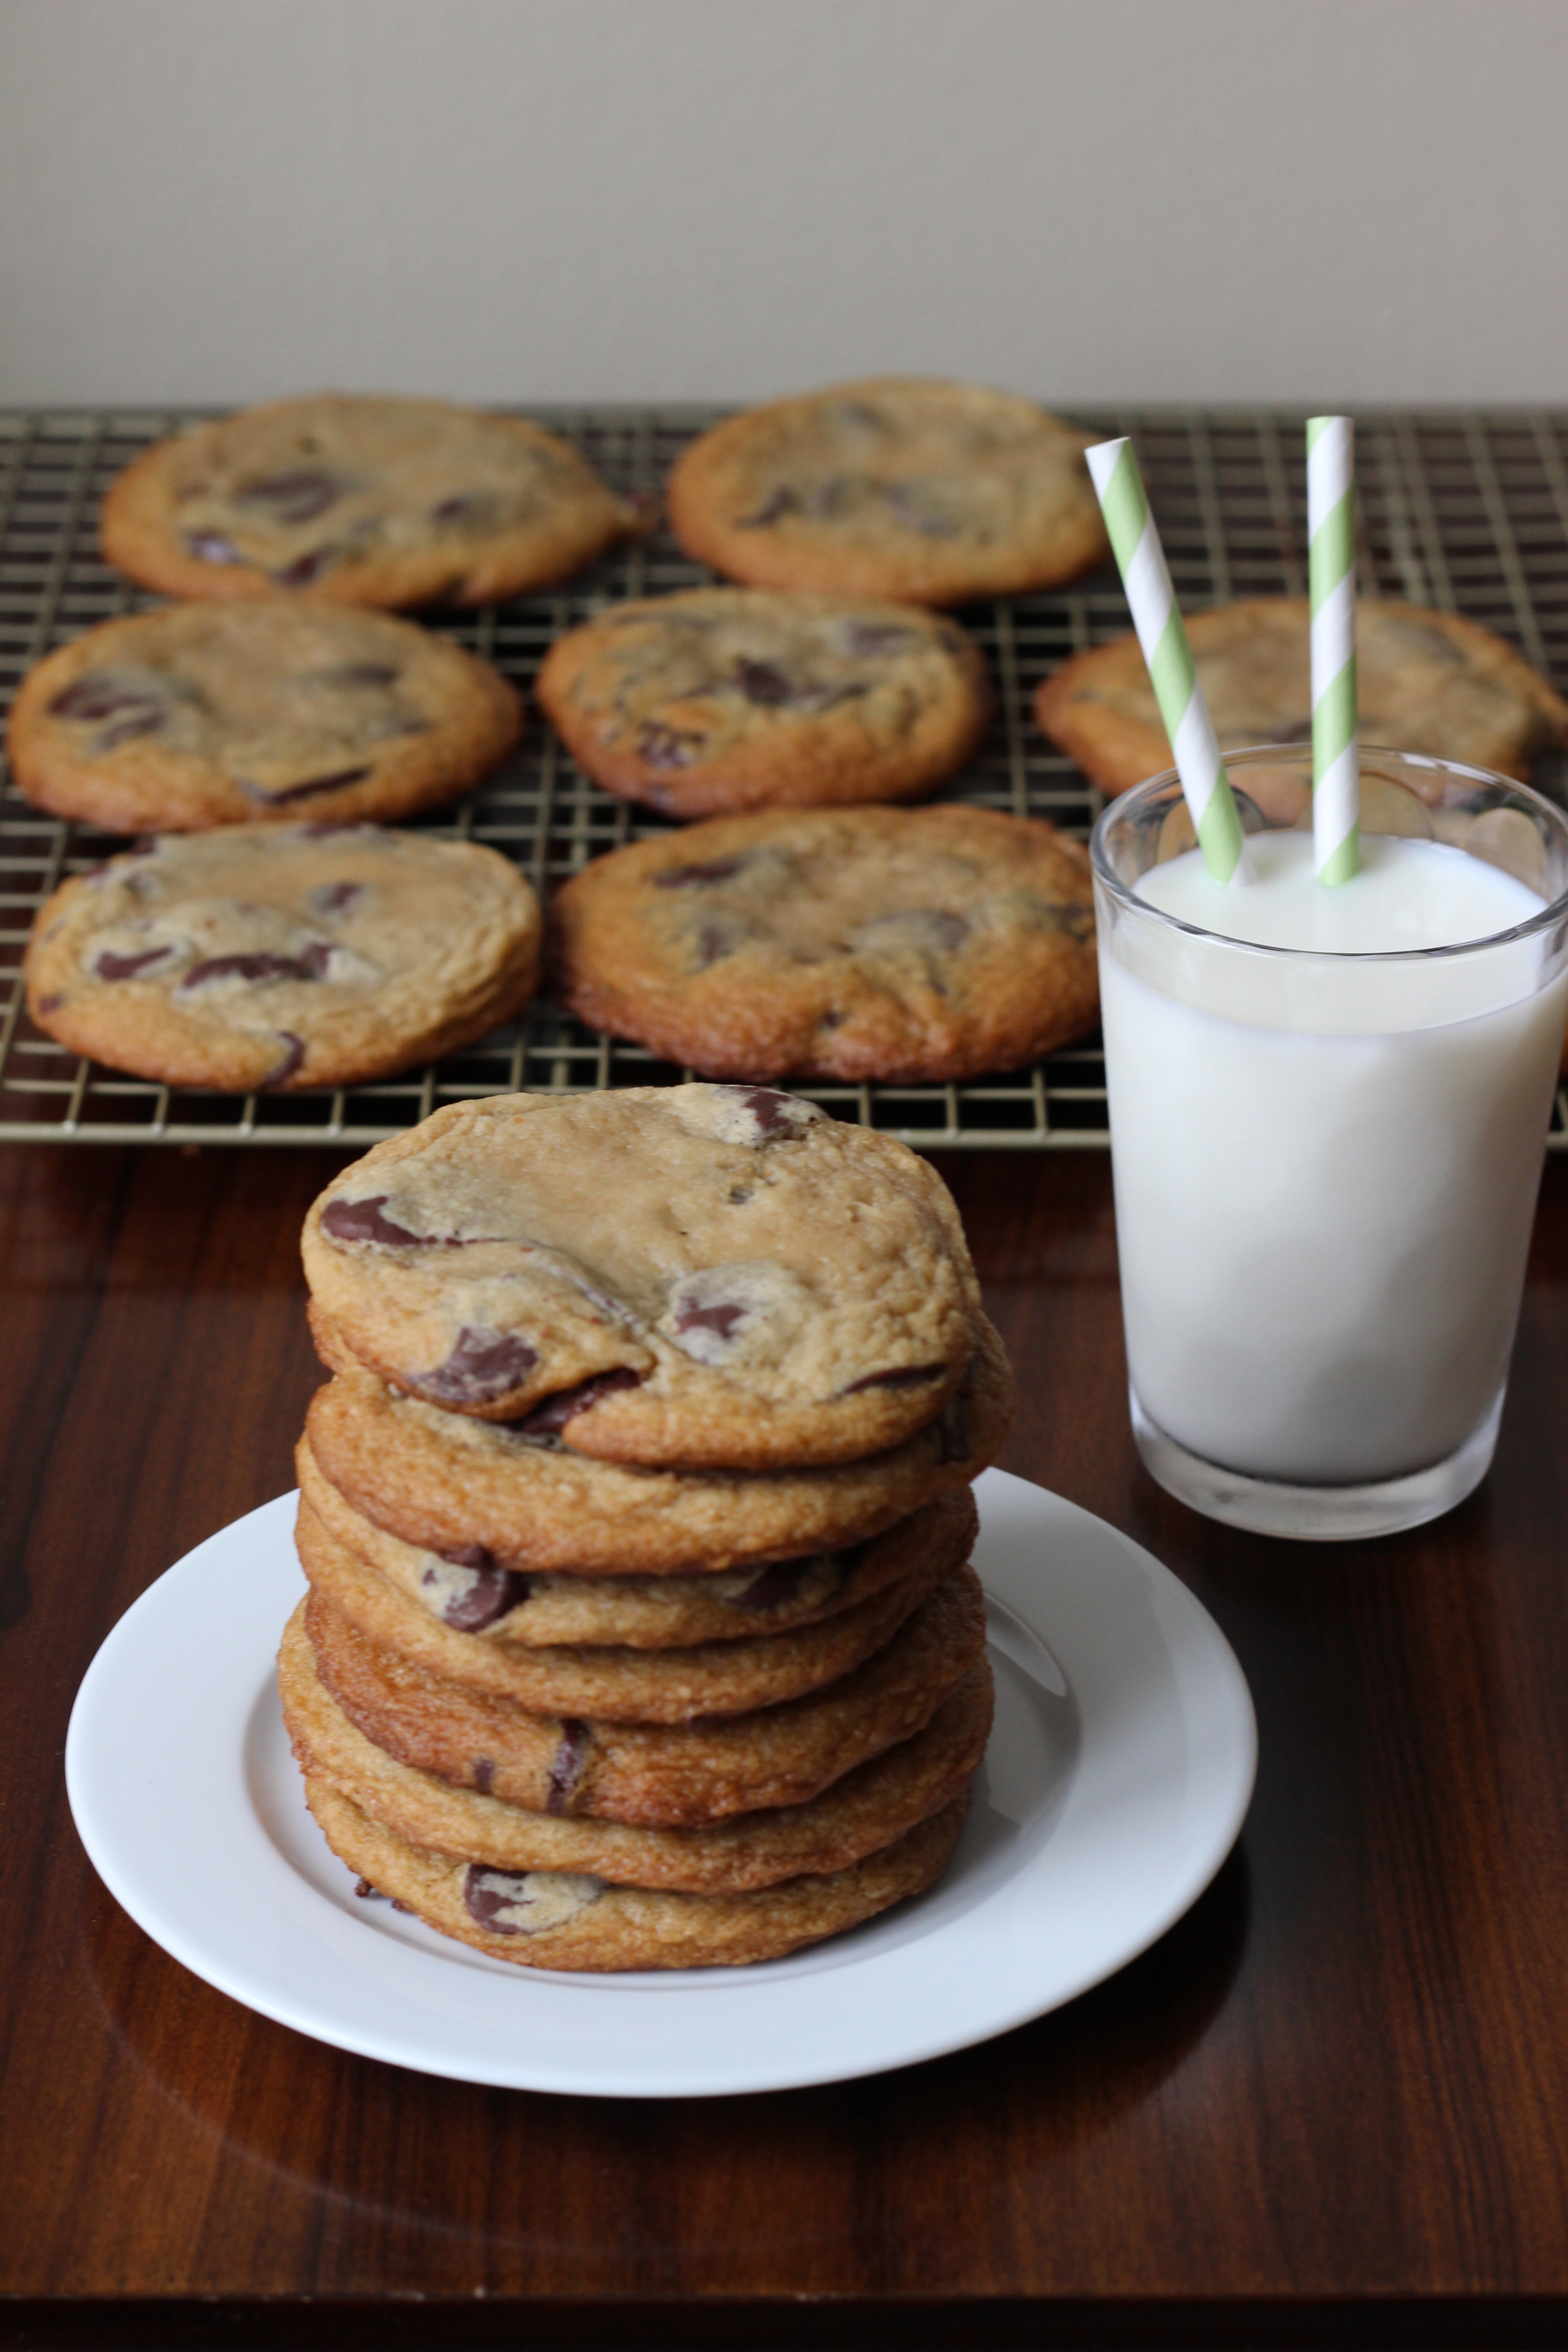 Chocolate Chip Cookies made with Cream Cheese